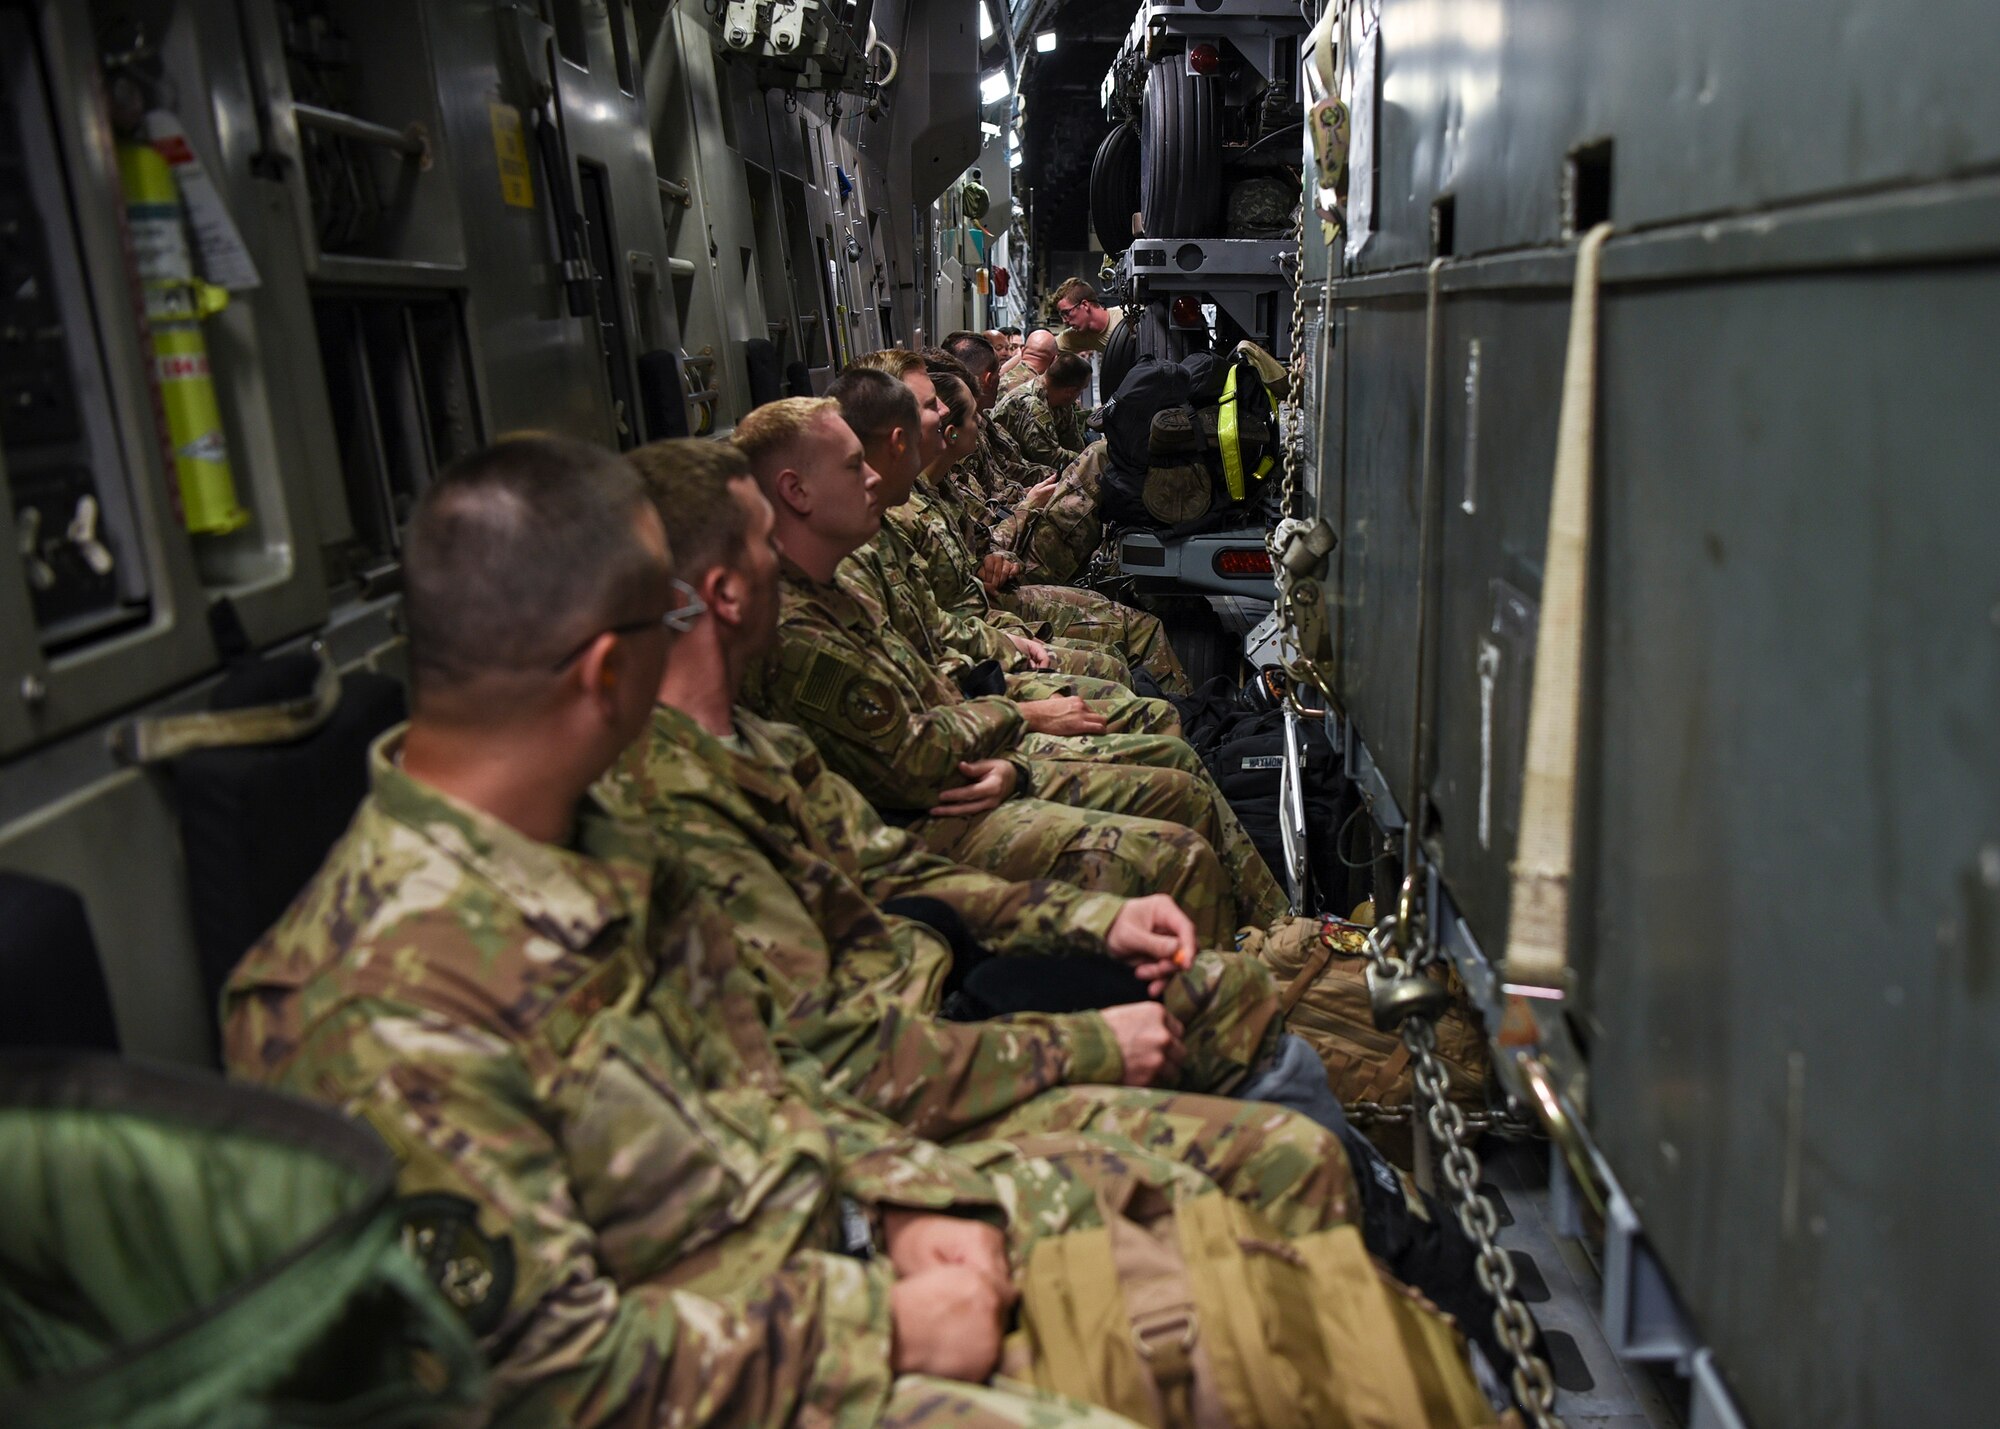 Airmen in support of the 75th Fighter Squadron (FS) wait in a C-17 Globemaster III, July 5, 2018, at Moody Air Force Base, Ga. The 75th FS and supporting units recently deployed to an undisclosed location in Southwest Asia. While deployed, the 75th FS will provide close air support missions through the A-10 Thunderbolt II, which is specifically designed for long loiter time, accurate weapons delivery, austere field capability and survivability. (U.S. Air Force photo by Airman Taryn Butler)